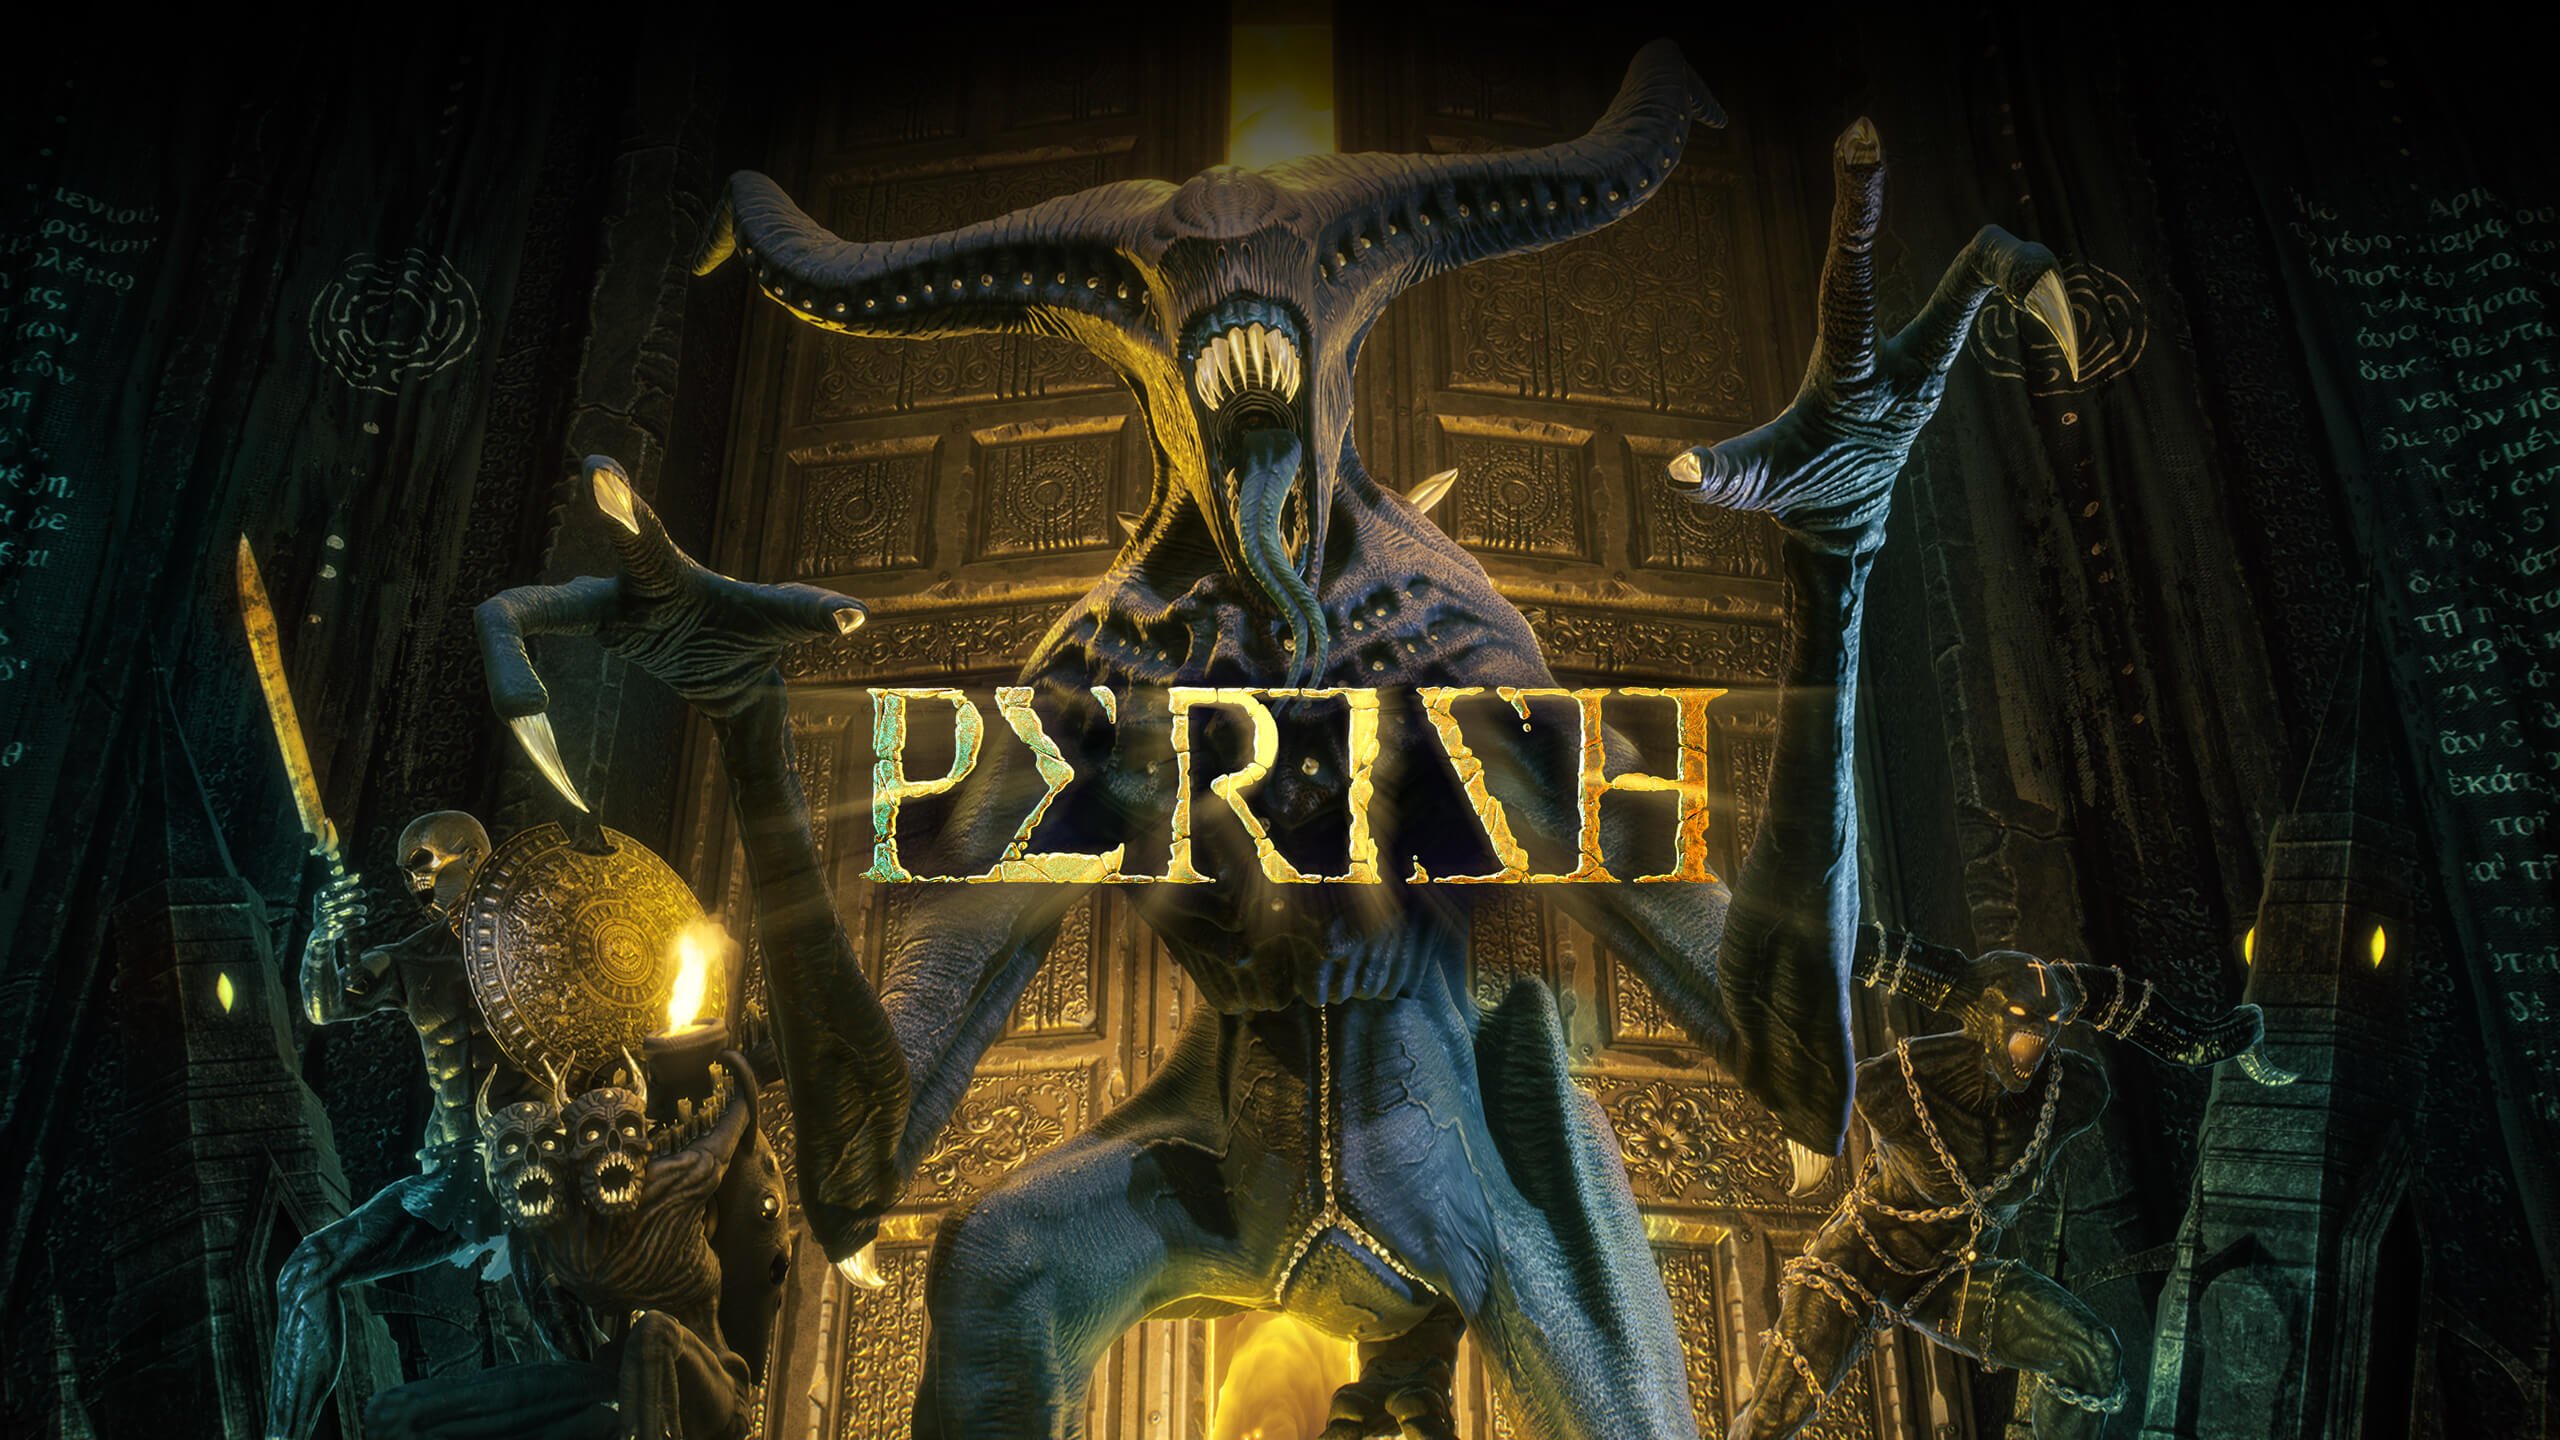 Coop roguelike firstperson shooter PERISH launches February 2, 2023